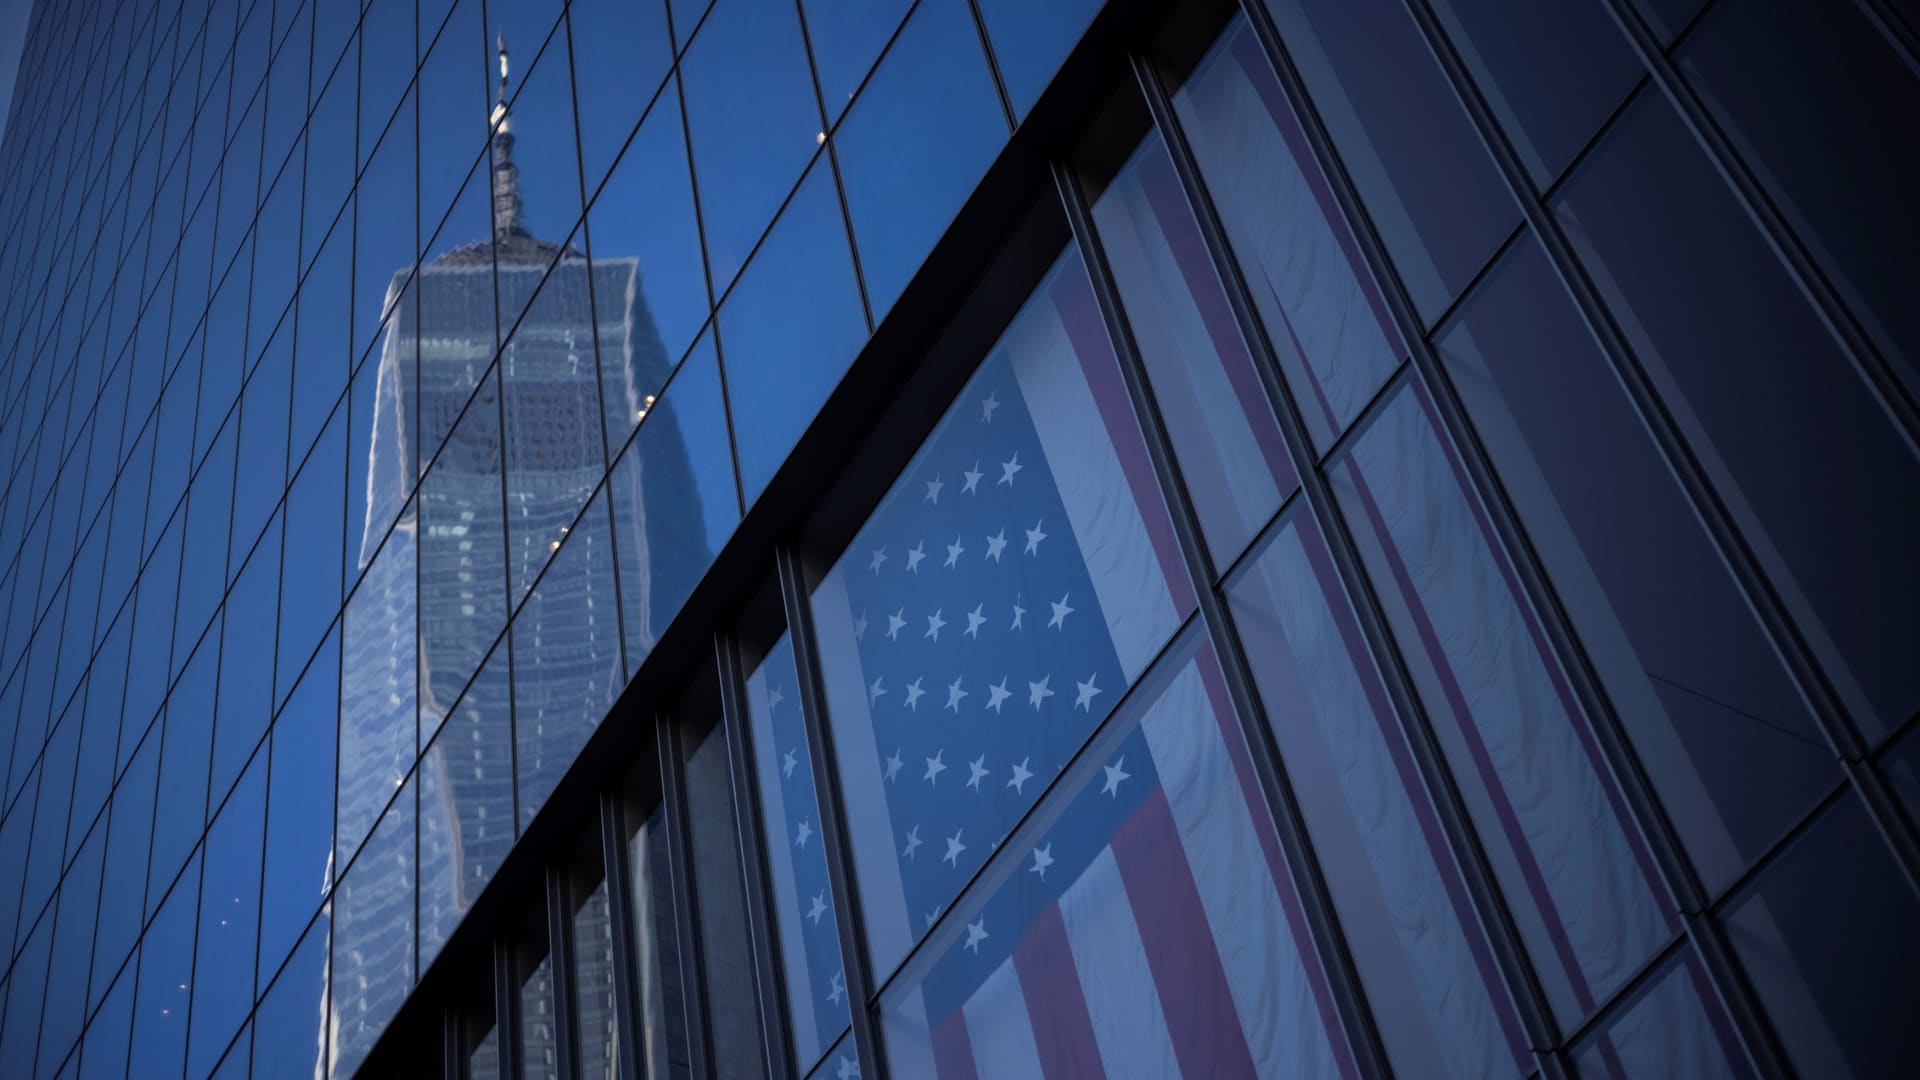 The One World Trade Center is reflected on a nearby building ahead of the 20th anniversary of the September 11 attacks in Manhattan, New York City, U.S., September 10, 2021.